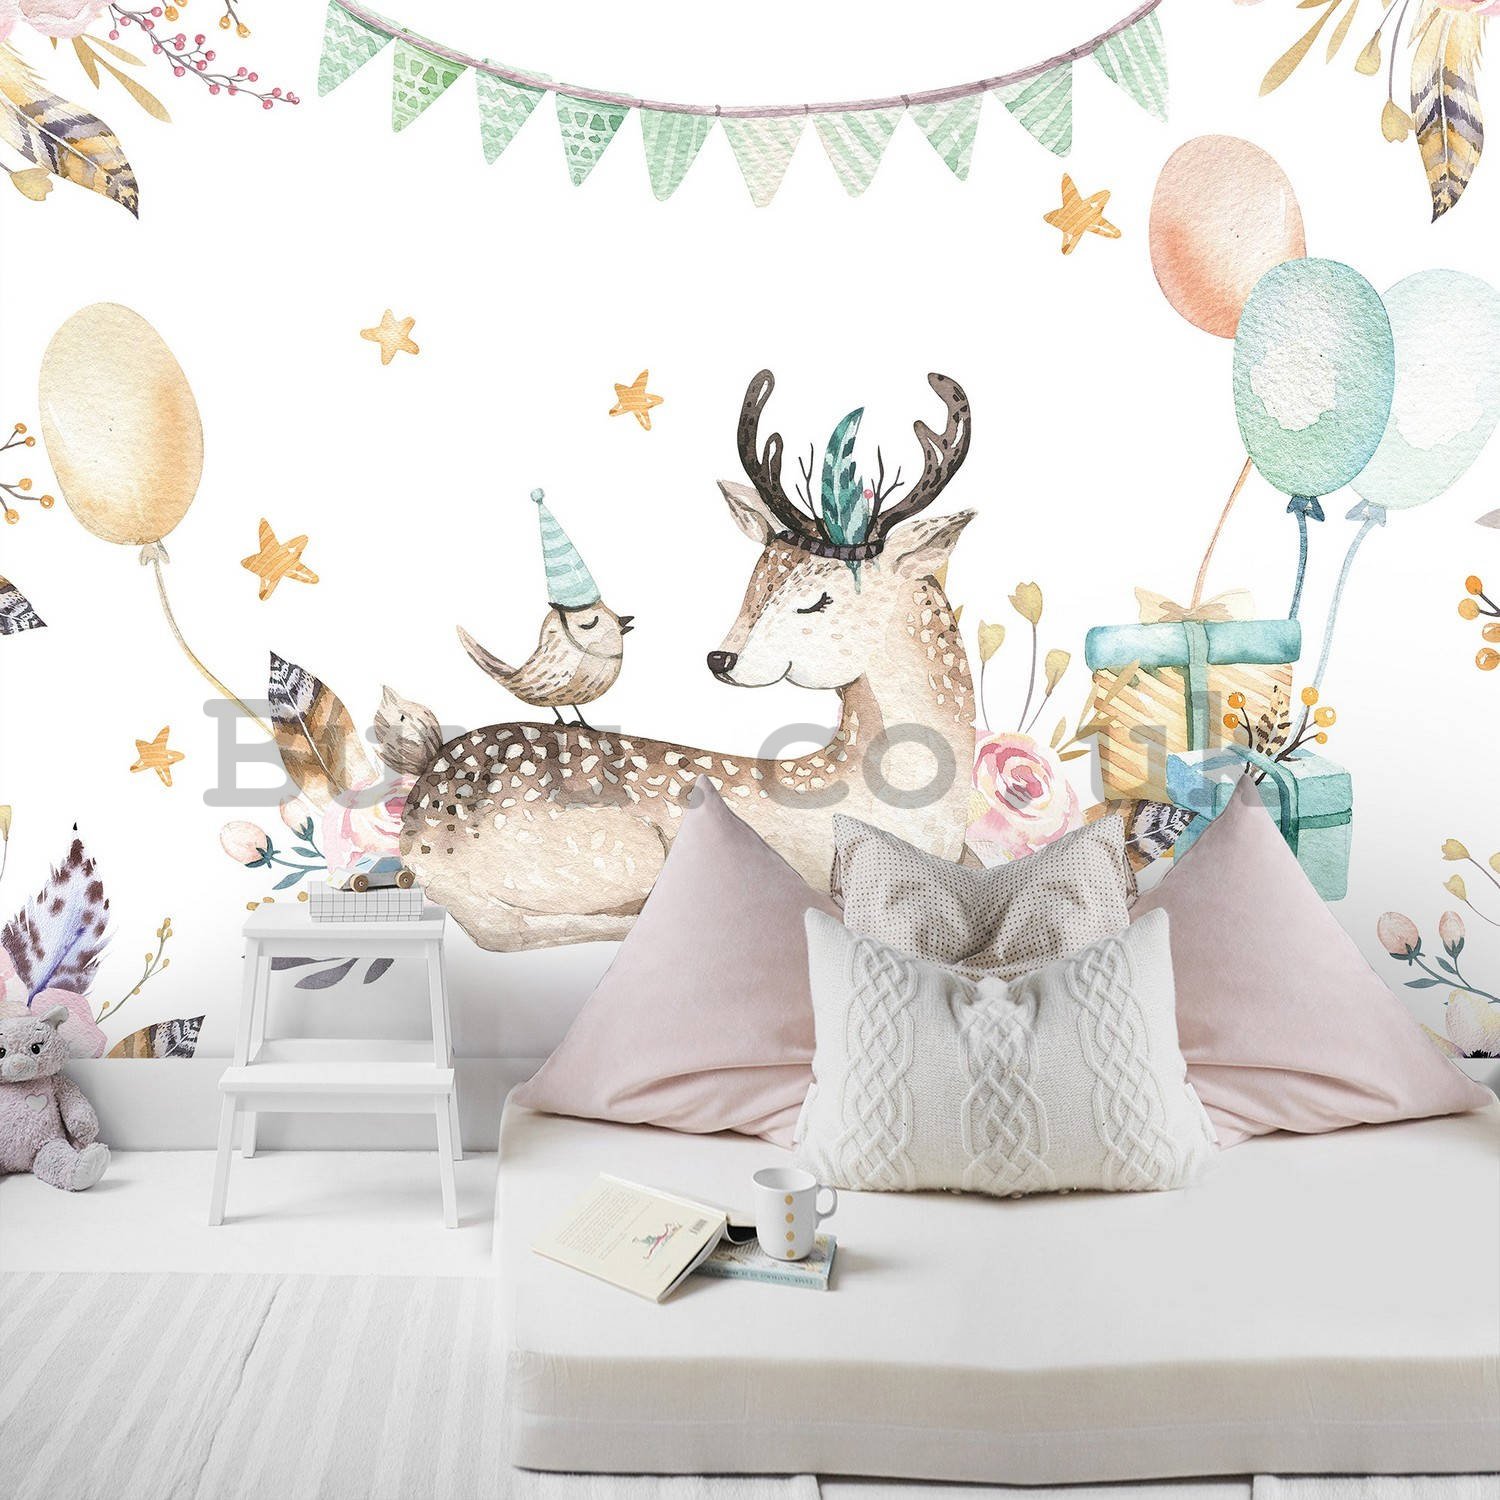 Wall mural vlies: Celebration with animals - 254x184 cm